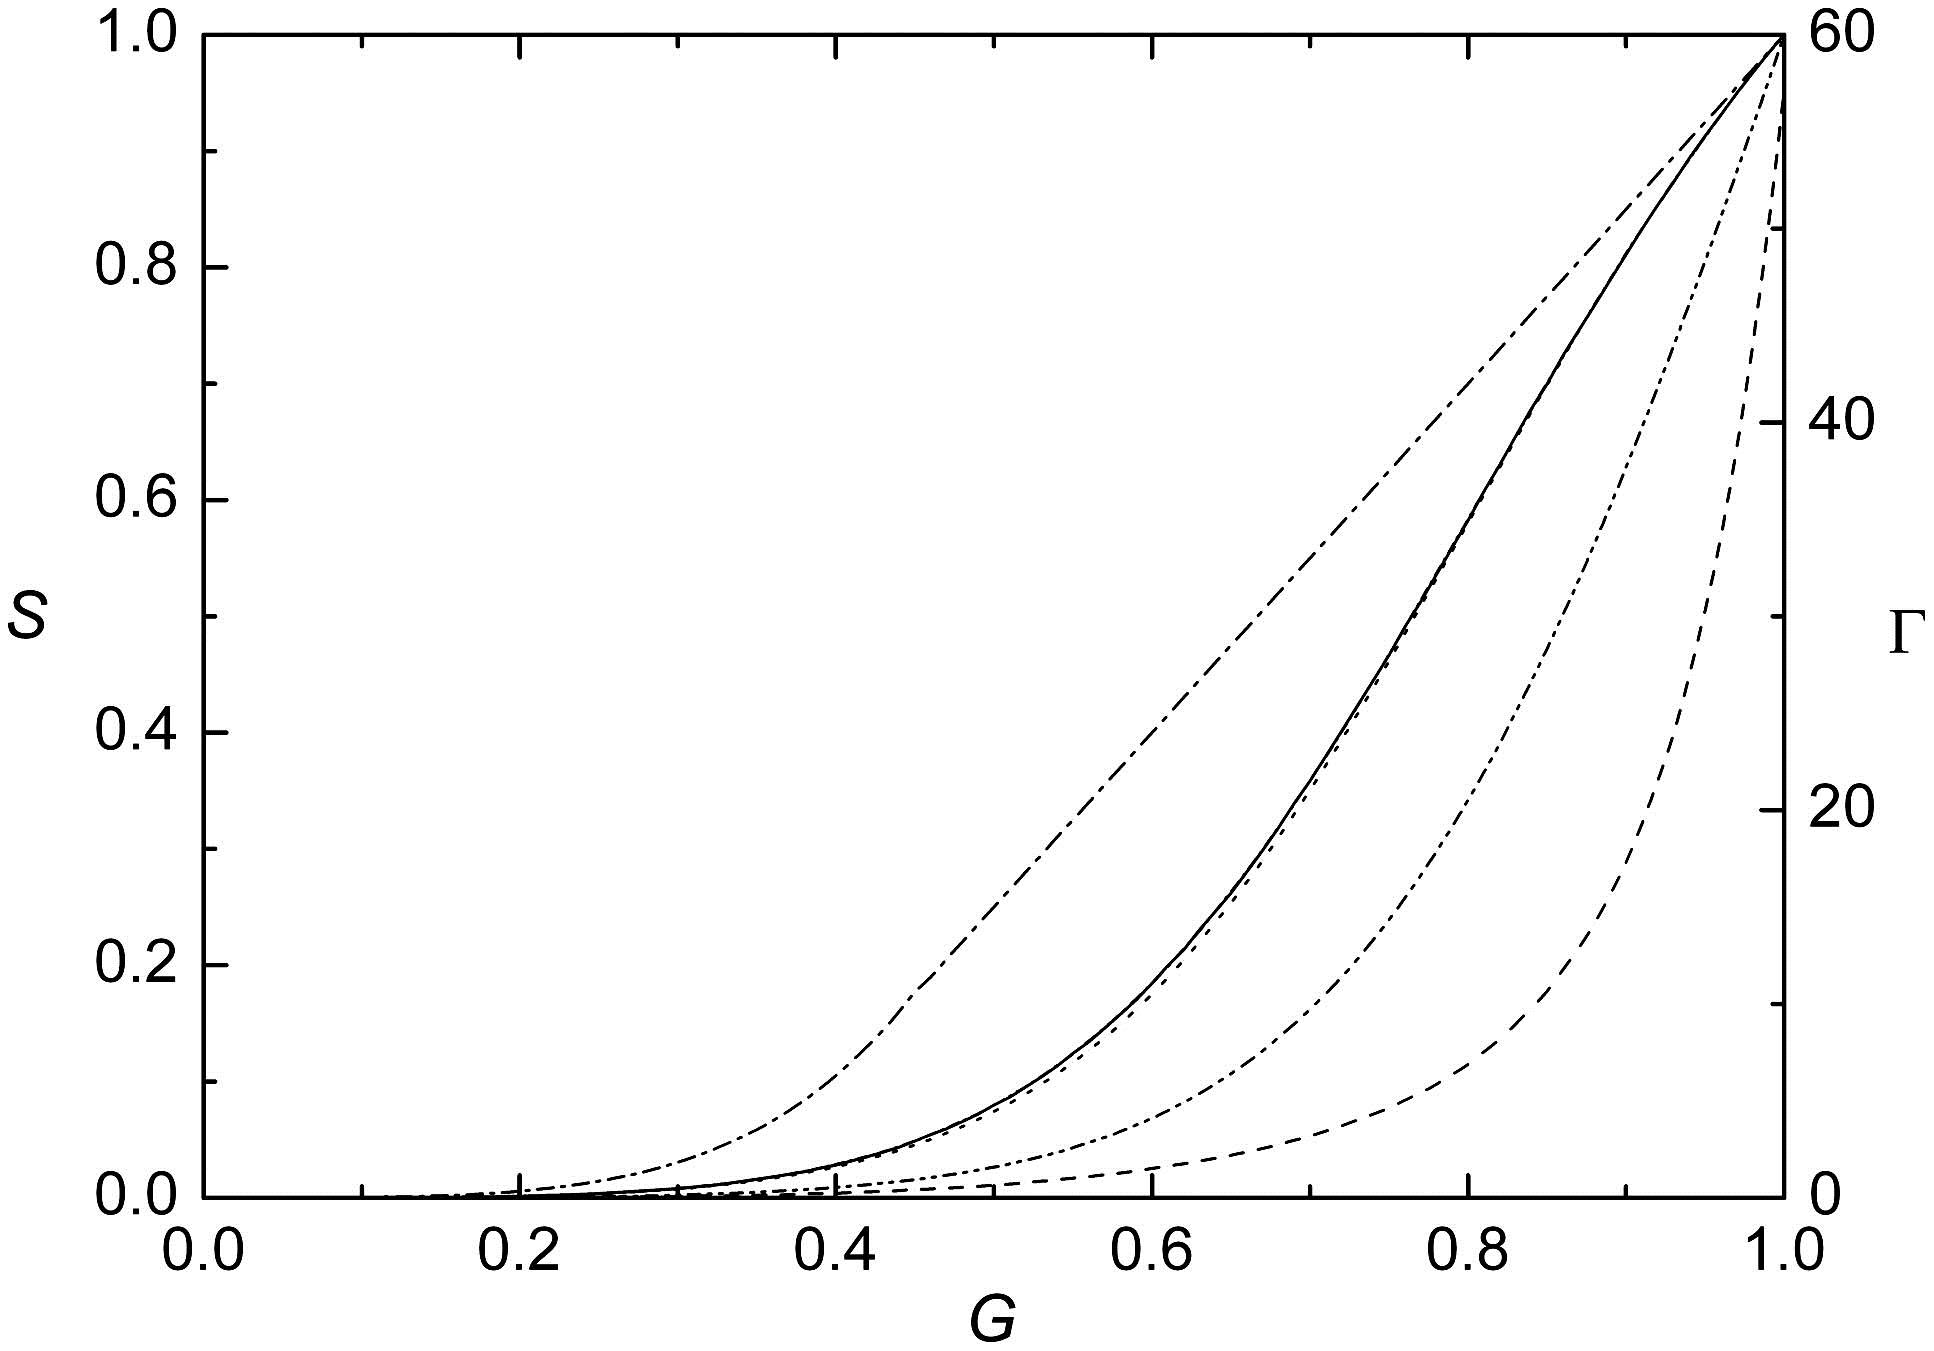 Strehl ratio (solid curve) as a function of the core size. The approximations given by Eq. (6) (dotted curve) and Eq. (7) (short dashed-dotted curve) are also shown. Note that the latter is indistinguishable from the exact one. The Strehl ratio limit by Sales and Morris (dash-dotted curve) and by the parabolic approximation (dash-dot-dotted curve) are also shown for comparison. Finally, the peak-to-sidelobe ratio (dashed curve) for 0-π filters is shown in the secondary axis.